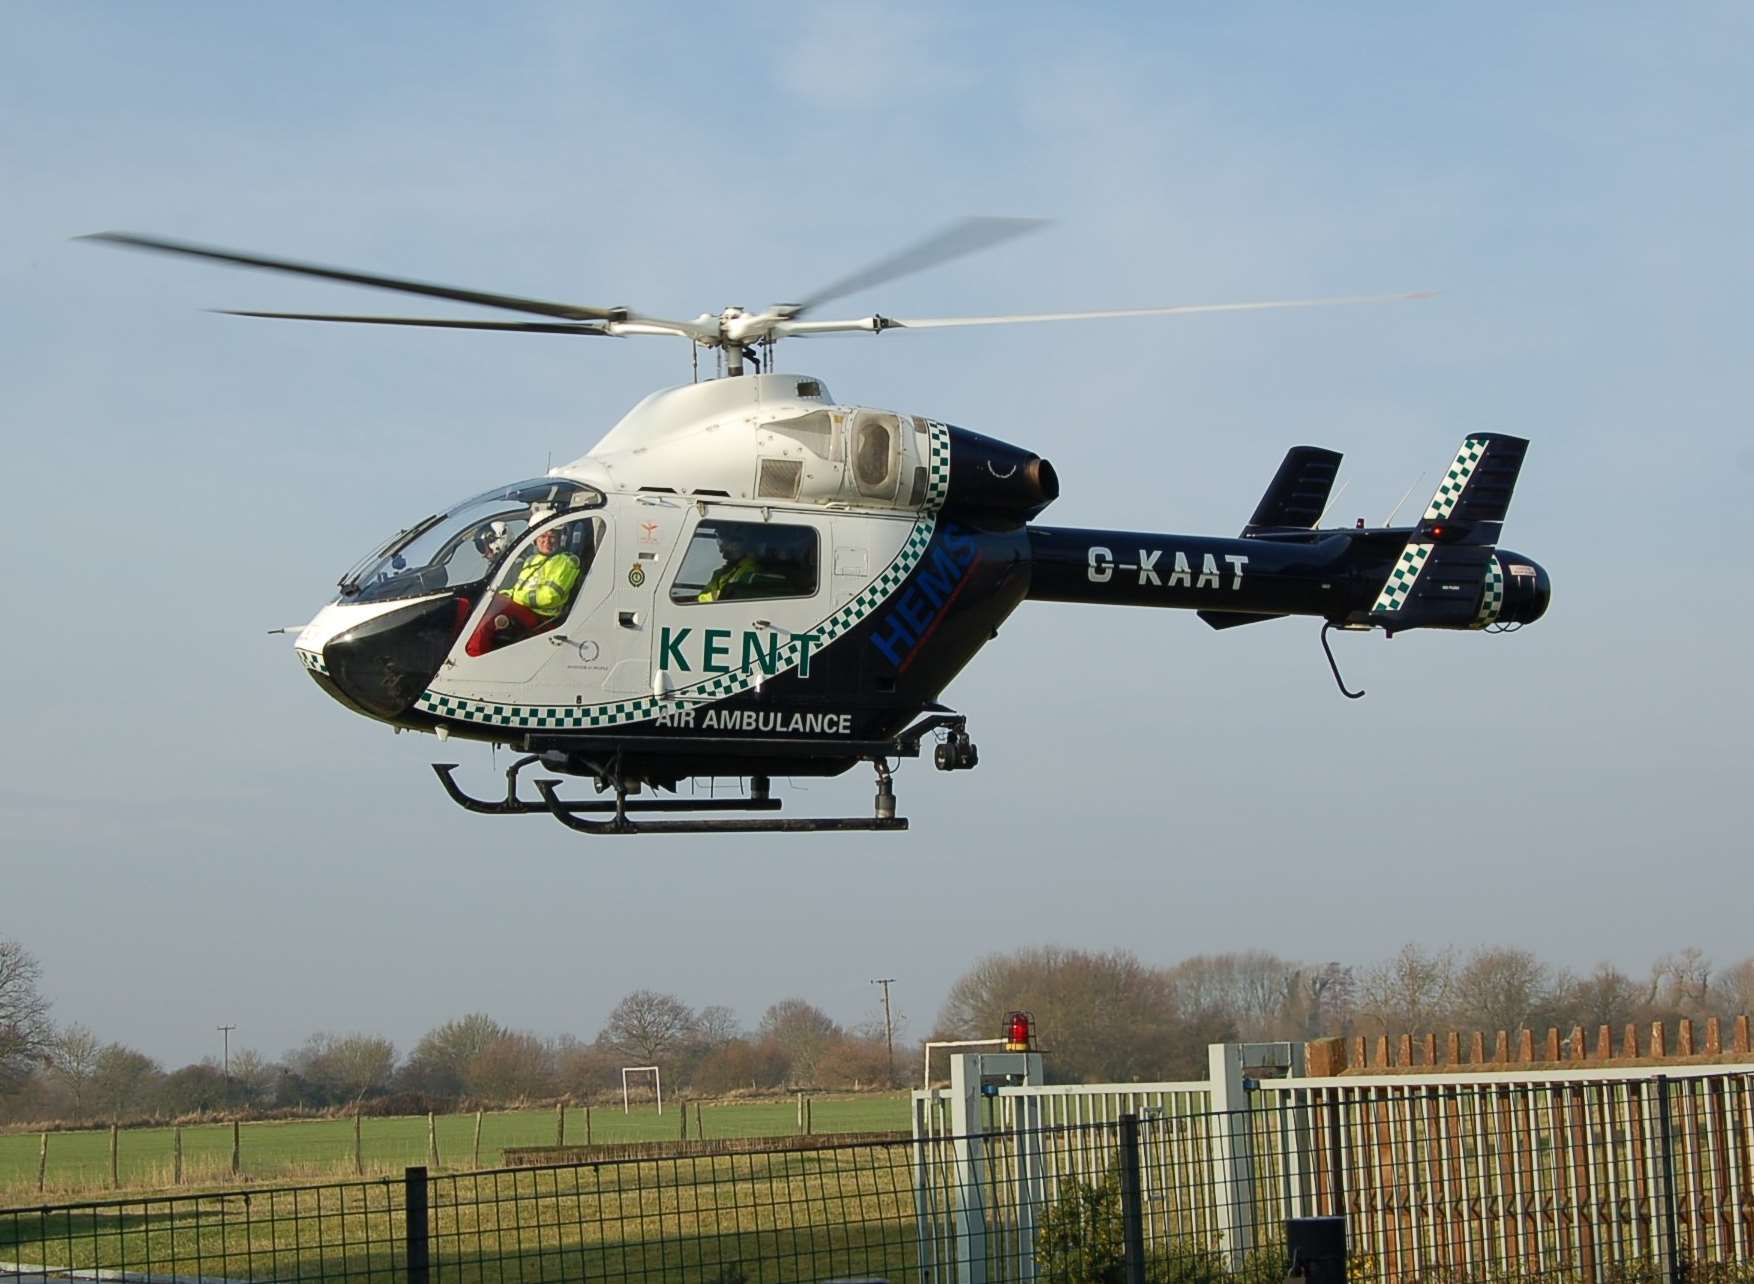 The air ambulance was called